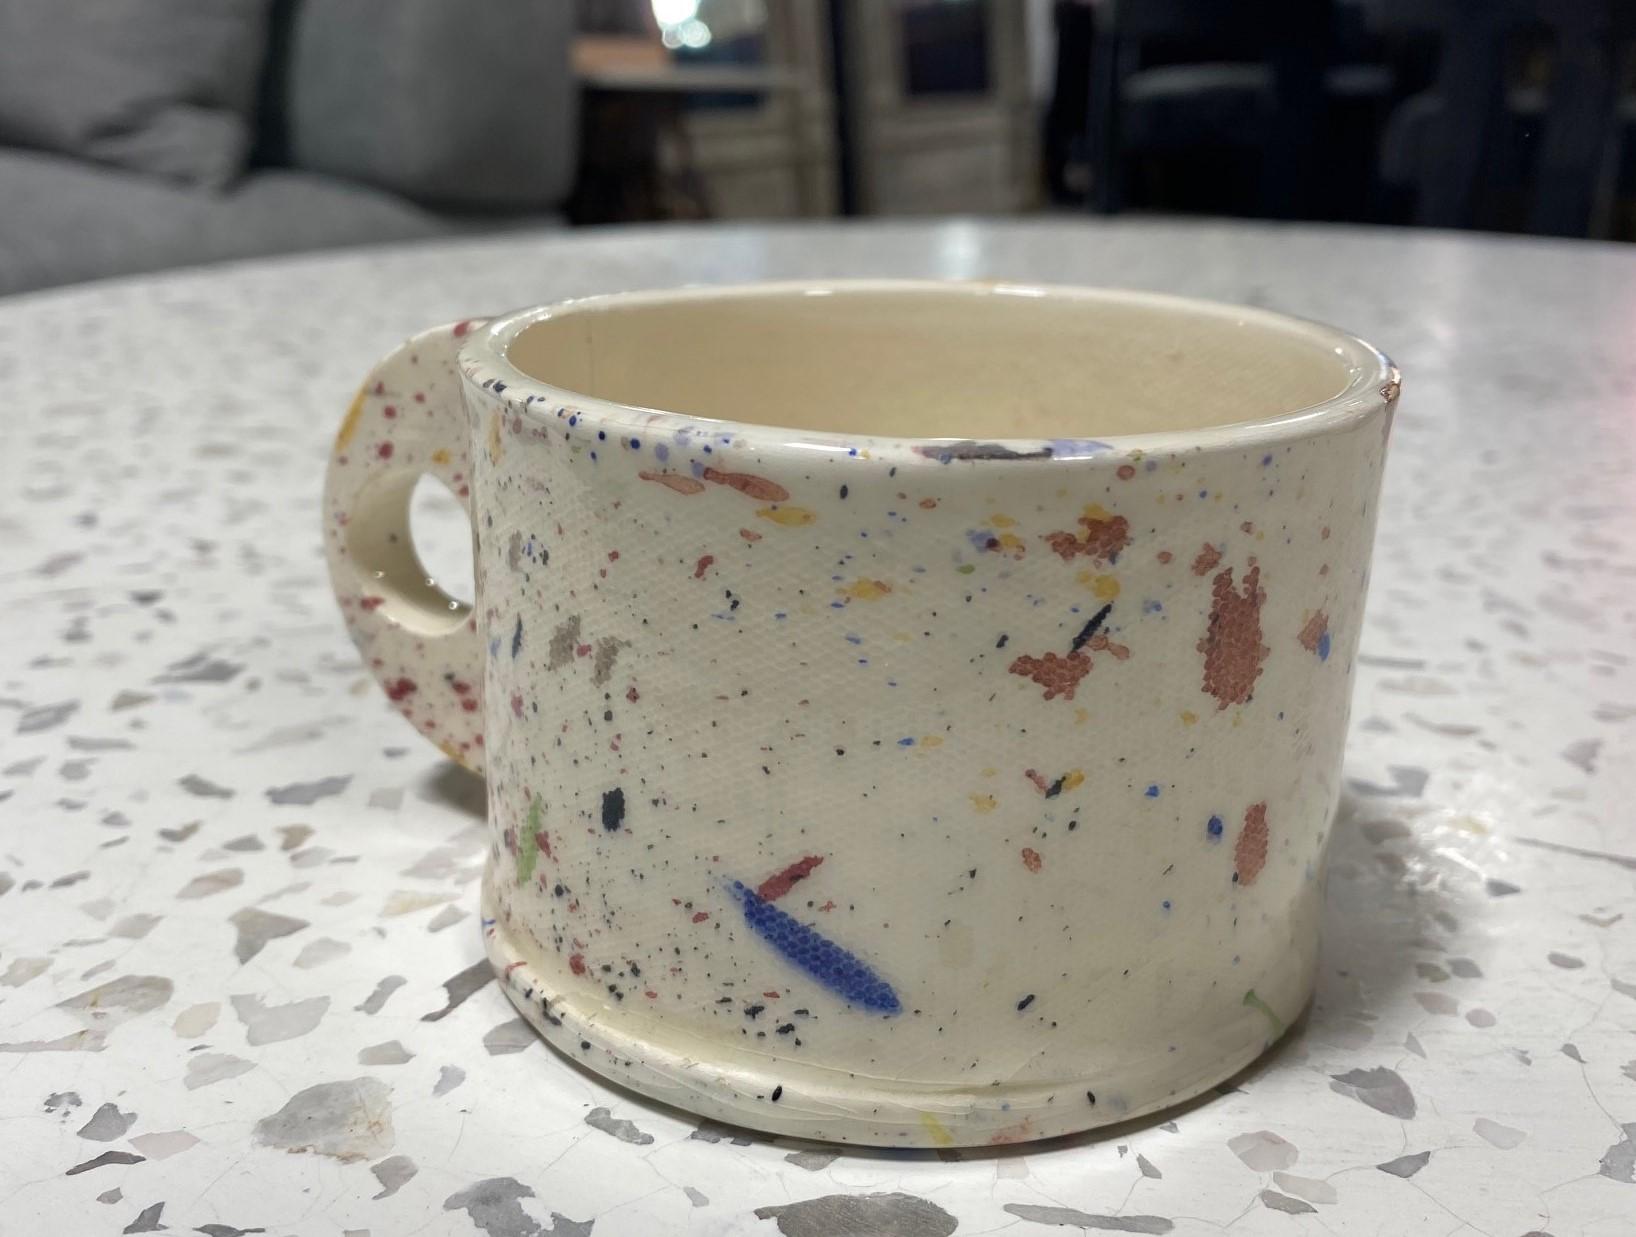 Glazed Peter Shire Exp Signed Post Modern Ceramic California Pottery Splatter Cup, 1979 For Sale